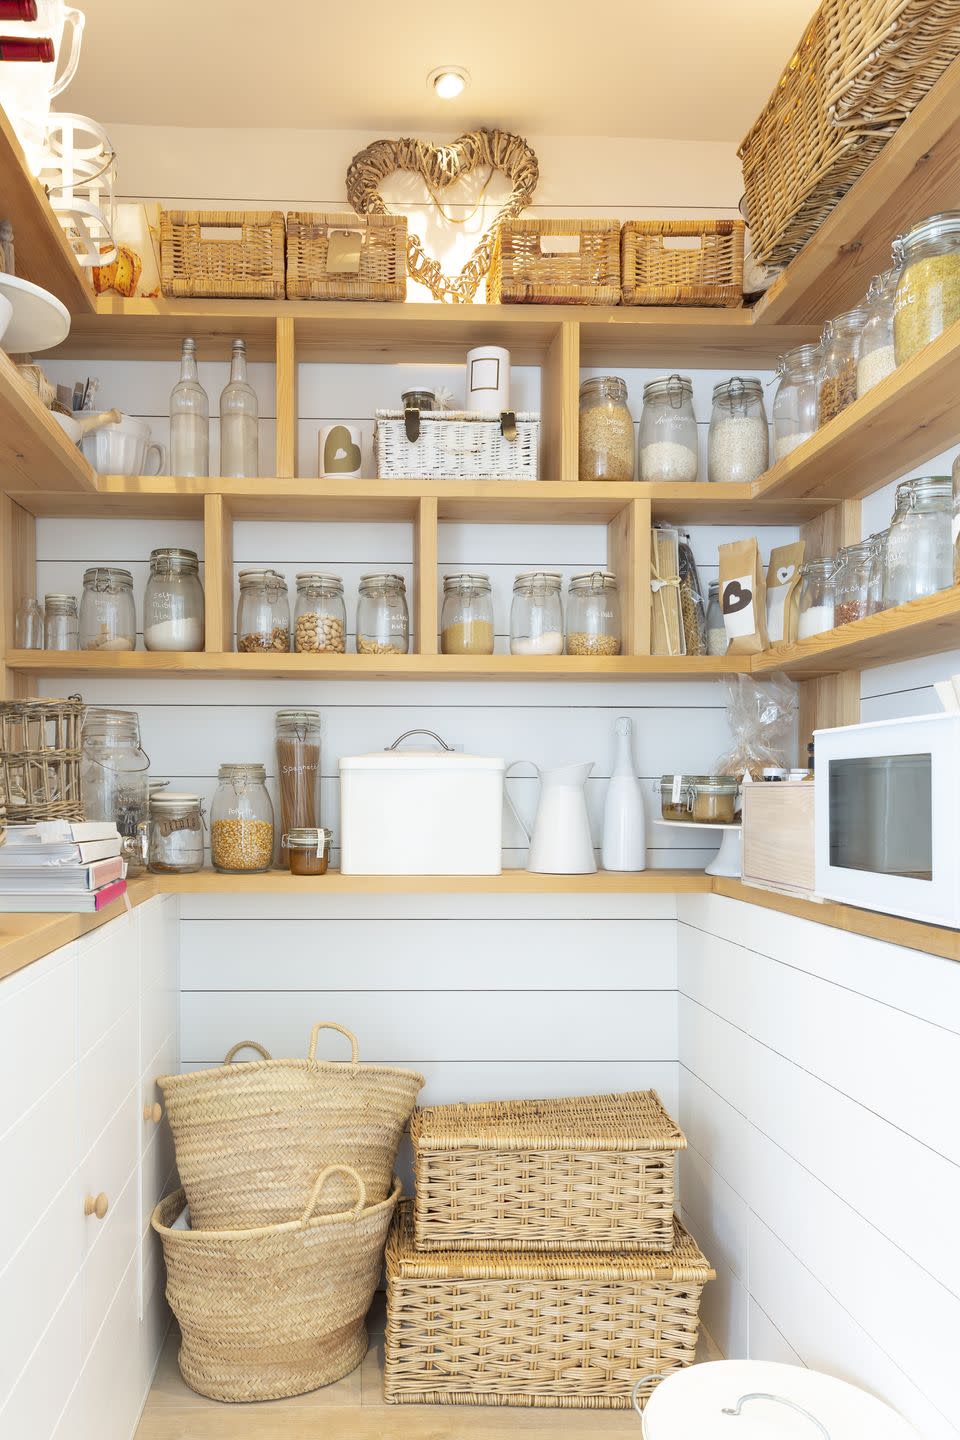 pantry organization ideas, unlabeled glass jars on the shelves in the pantry